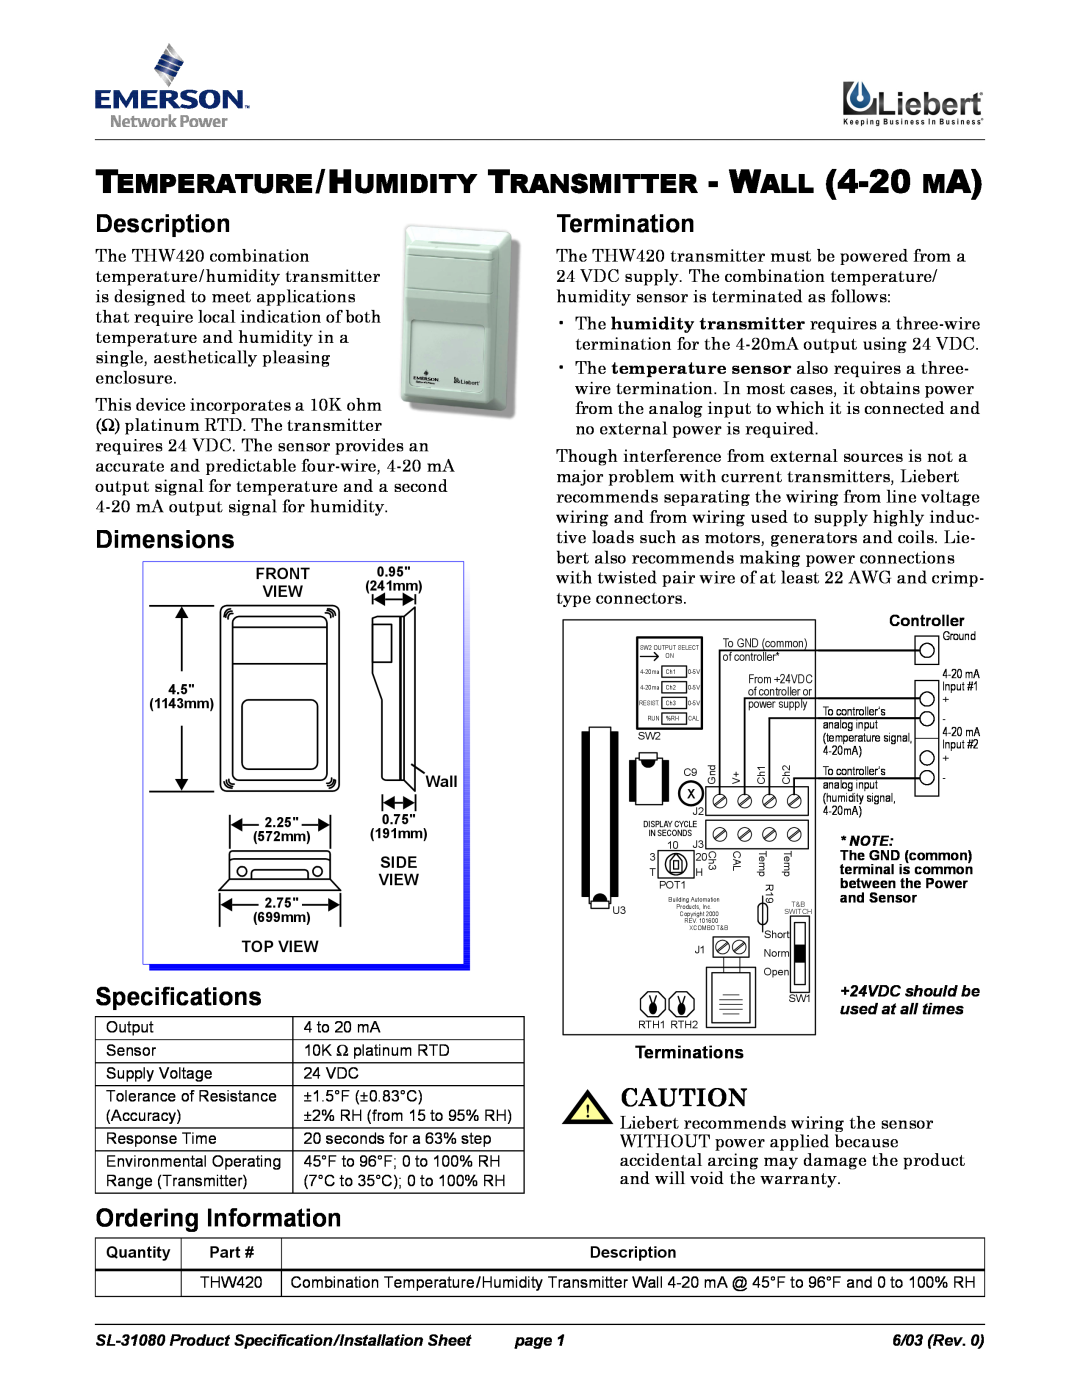 Emerson SL-31080 specifications TEMPERATURE/HUMIDITY TRANSMITTER - WALL 4-20 MA, Description, Dimensions, Specifications 